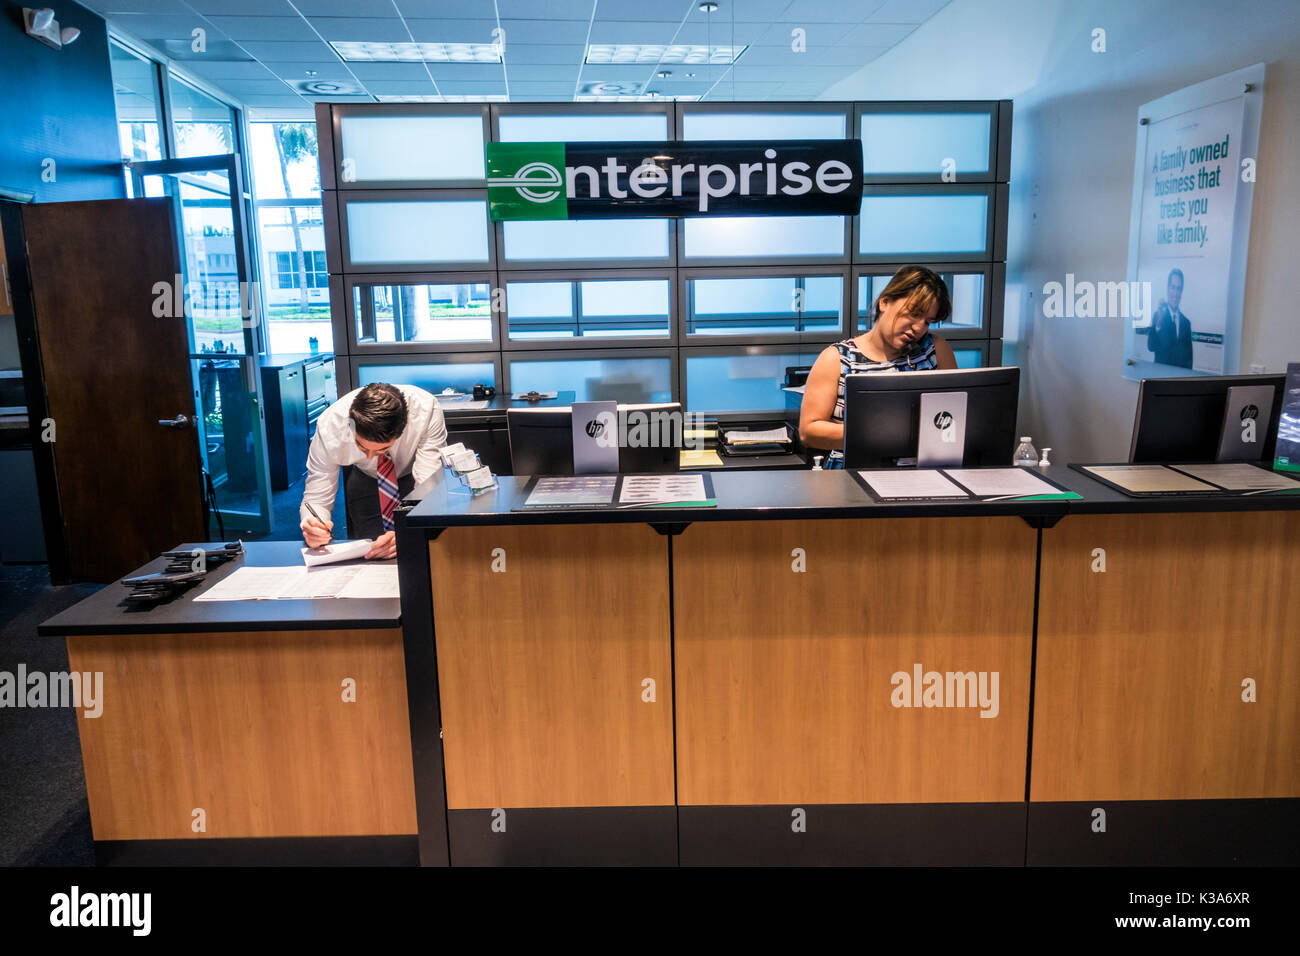 Miami Beach Florida,Enterprise,car cars rental,front counter desk,agent,interior inside,rent,adult adults man men male,woman women female lady,manager Stock Photo